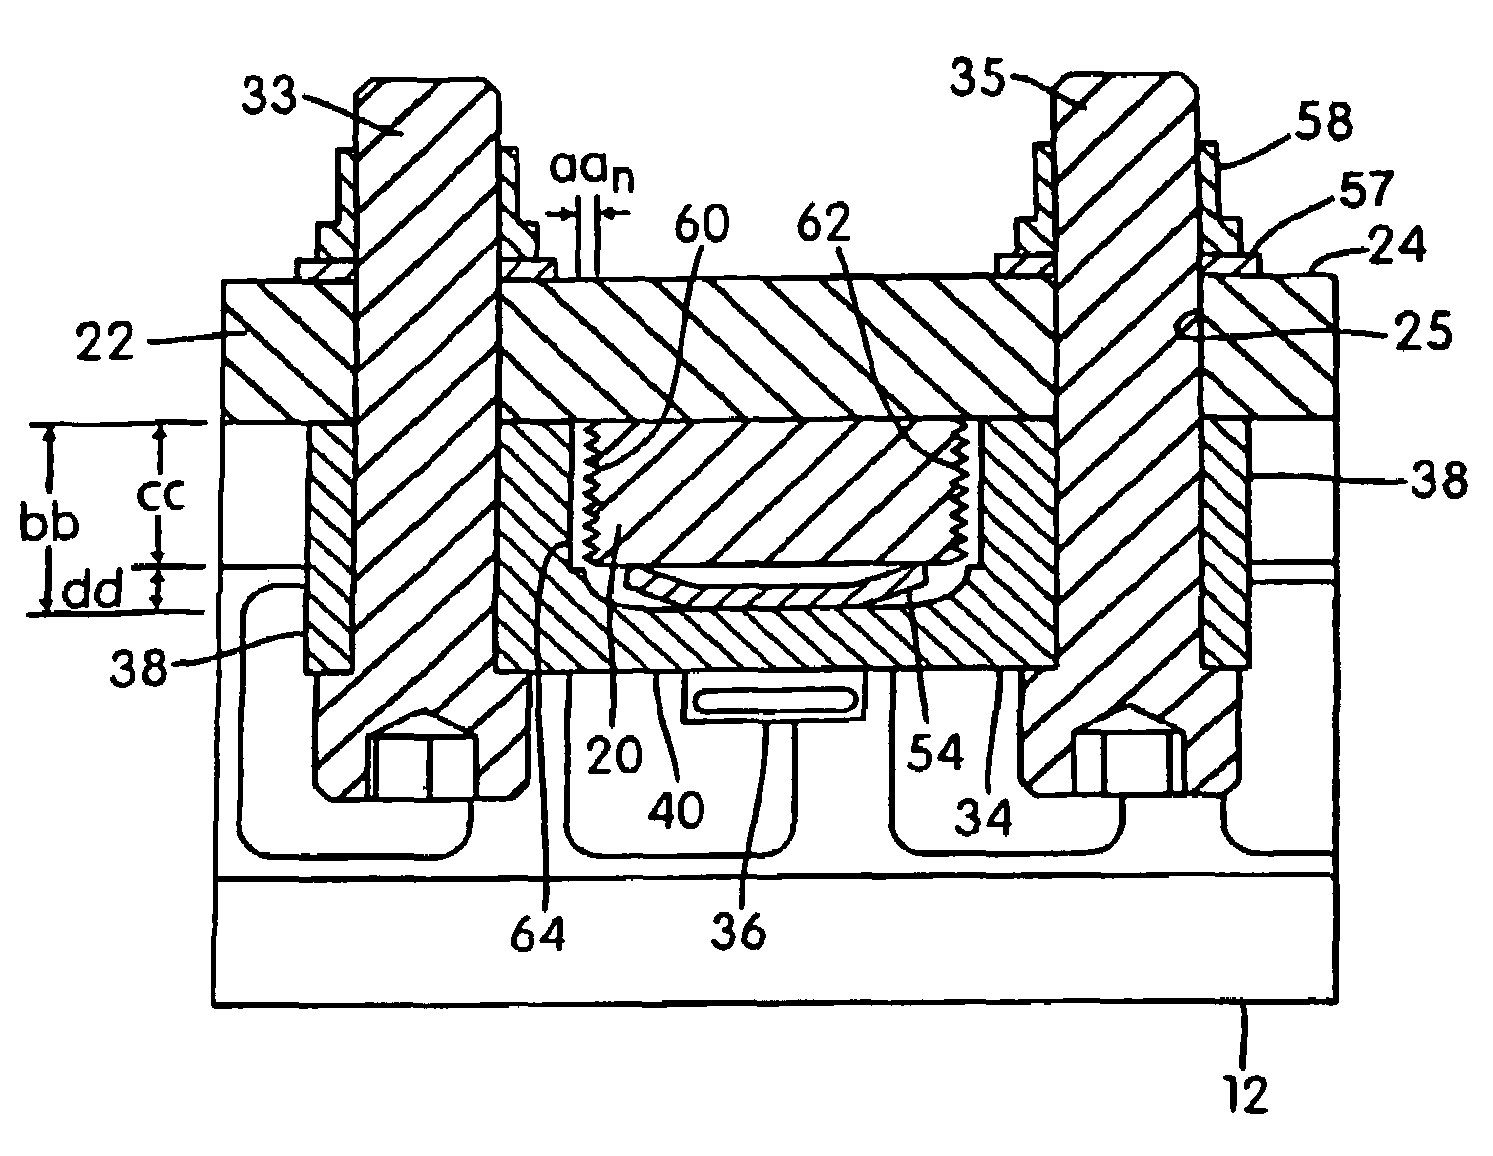 Brake rotor attachment assembly that promotes in plane uniform torque transfer distribution